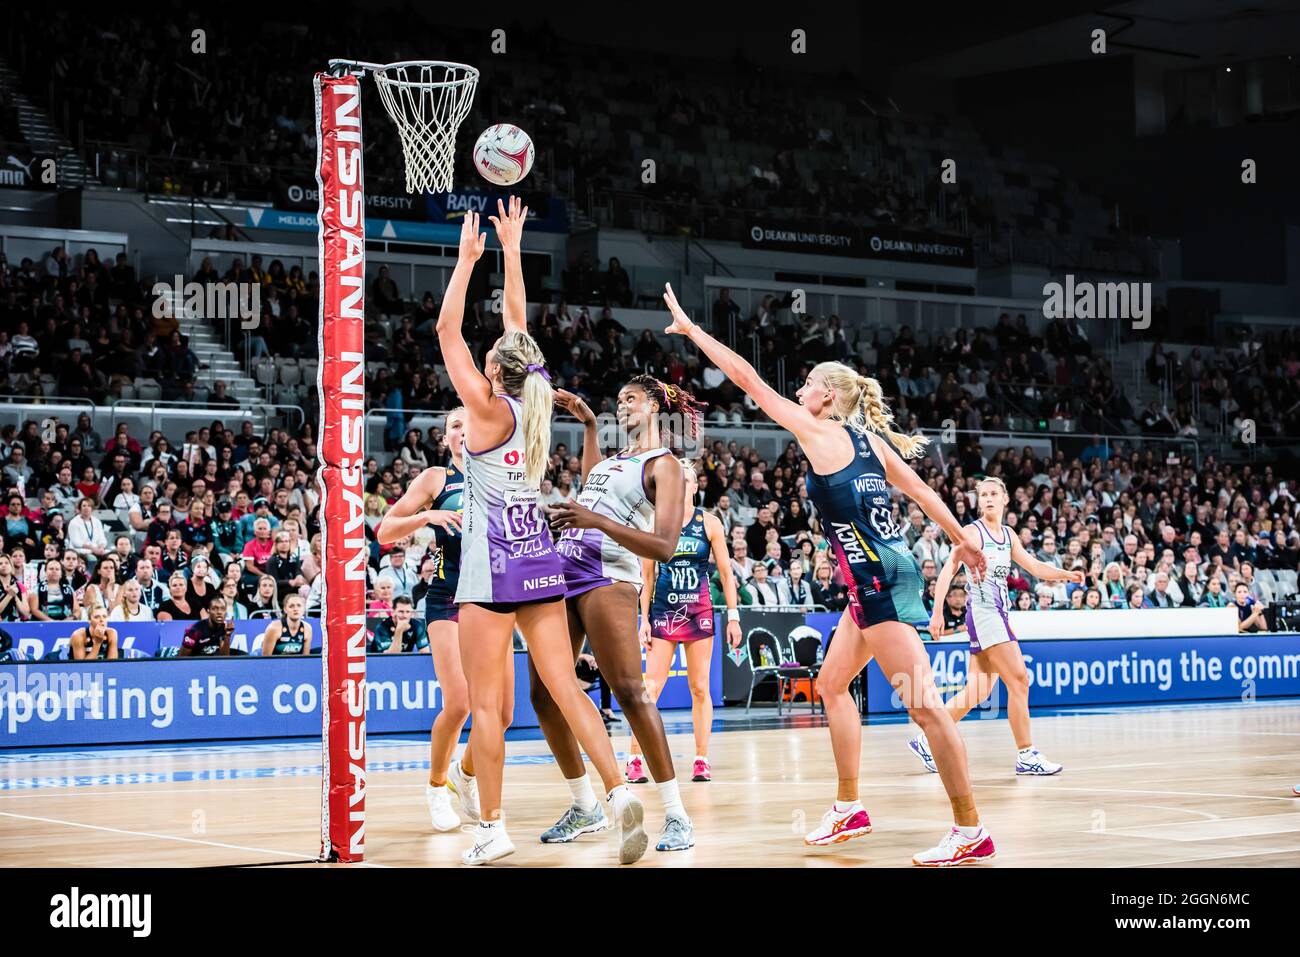 Melbourne, Australia. 15th Feb, 2015. Queensland Firebirds attacking, during the Suncorp Super Netball 2019 Season Game 1 between Melbourne Vixens and Queensland Firebirds at Melbourne Arena, Melbourne Olympic Park. Vixens won this home match with the score 73 - 61. (Photo by Alexander Bogatyrev/SOPA Image/Sipa USA) Credit: Sipa USA/Alamy Live News Stock Photo